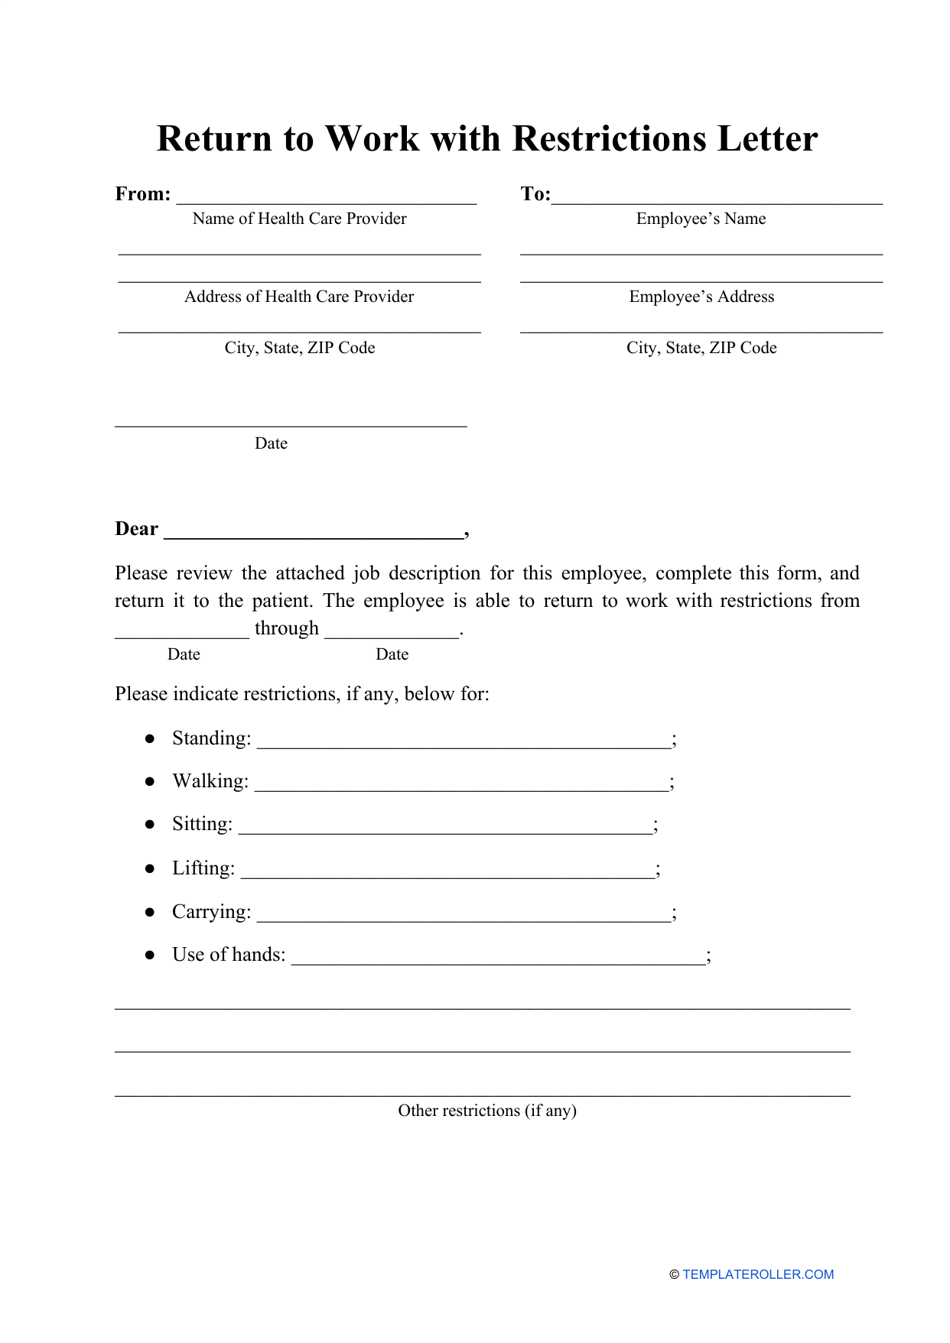 Return to Work With Restrictions Letter Template Download Printable PDF